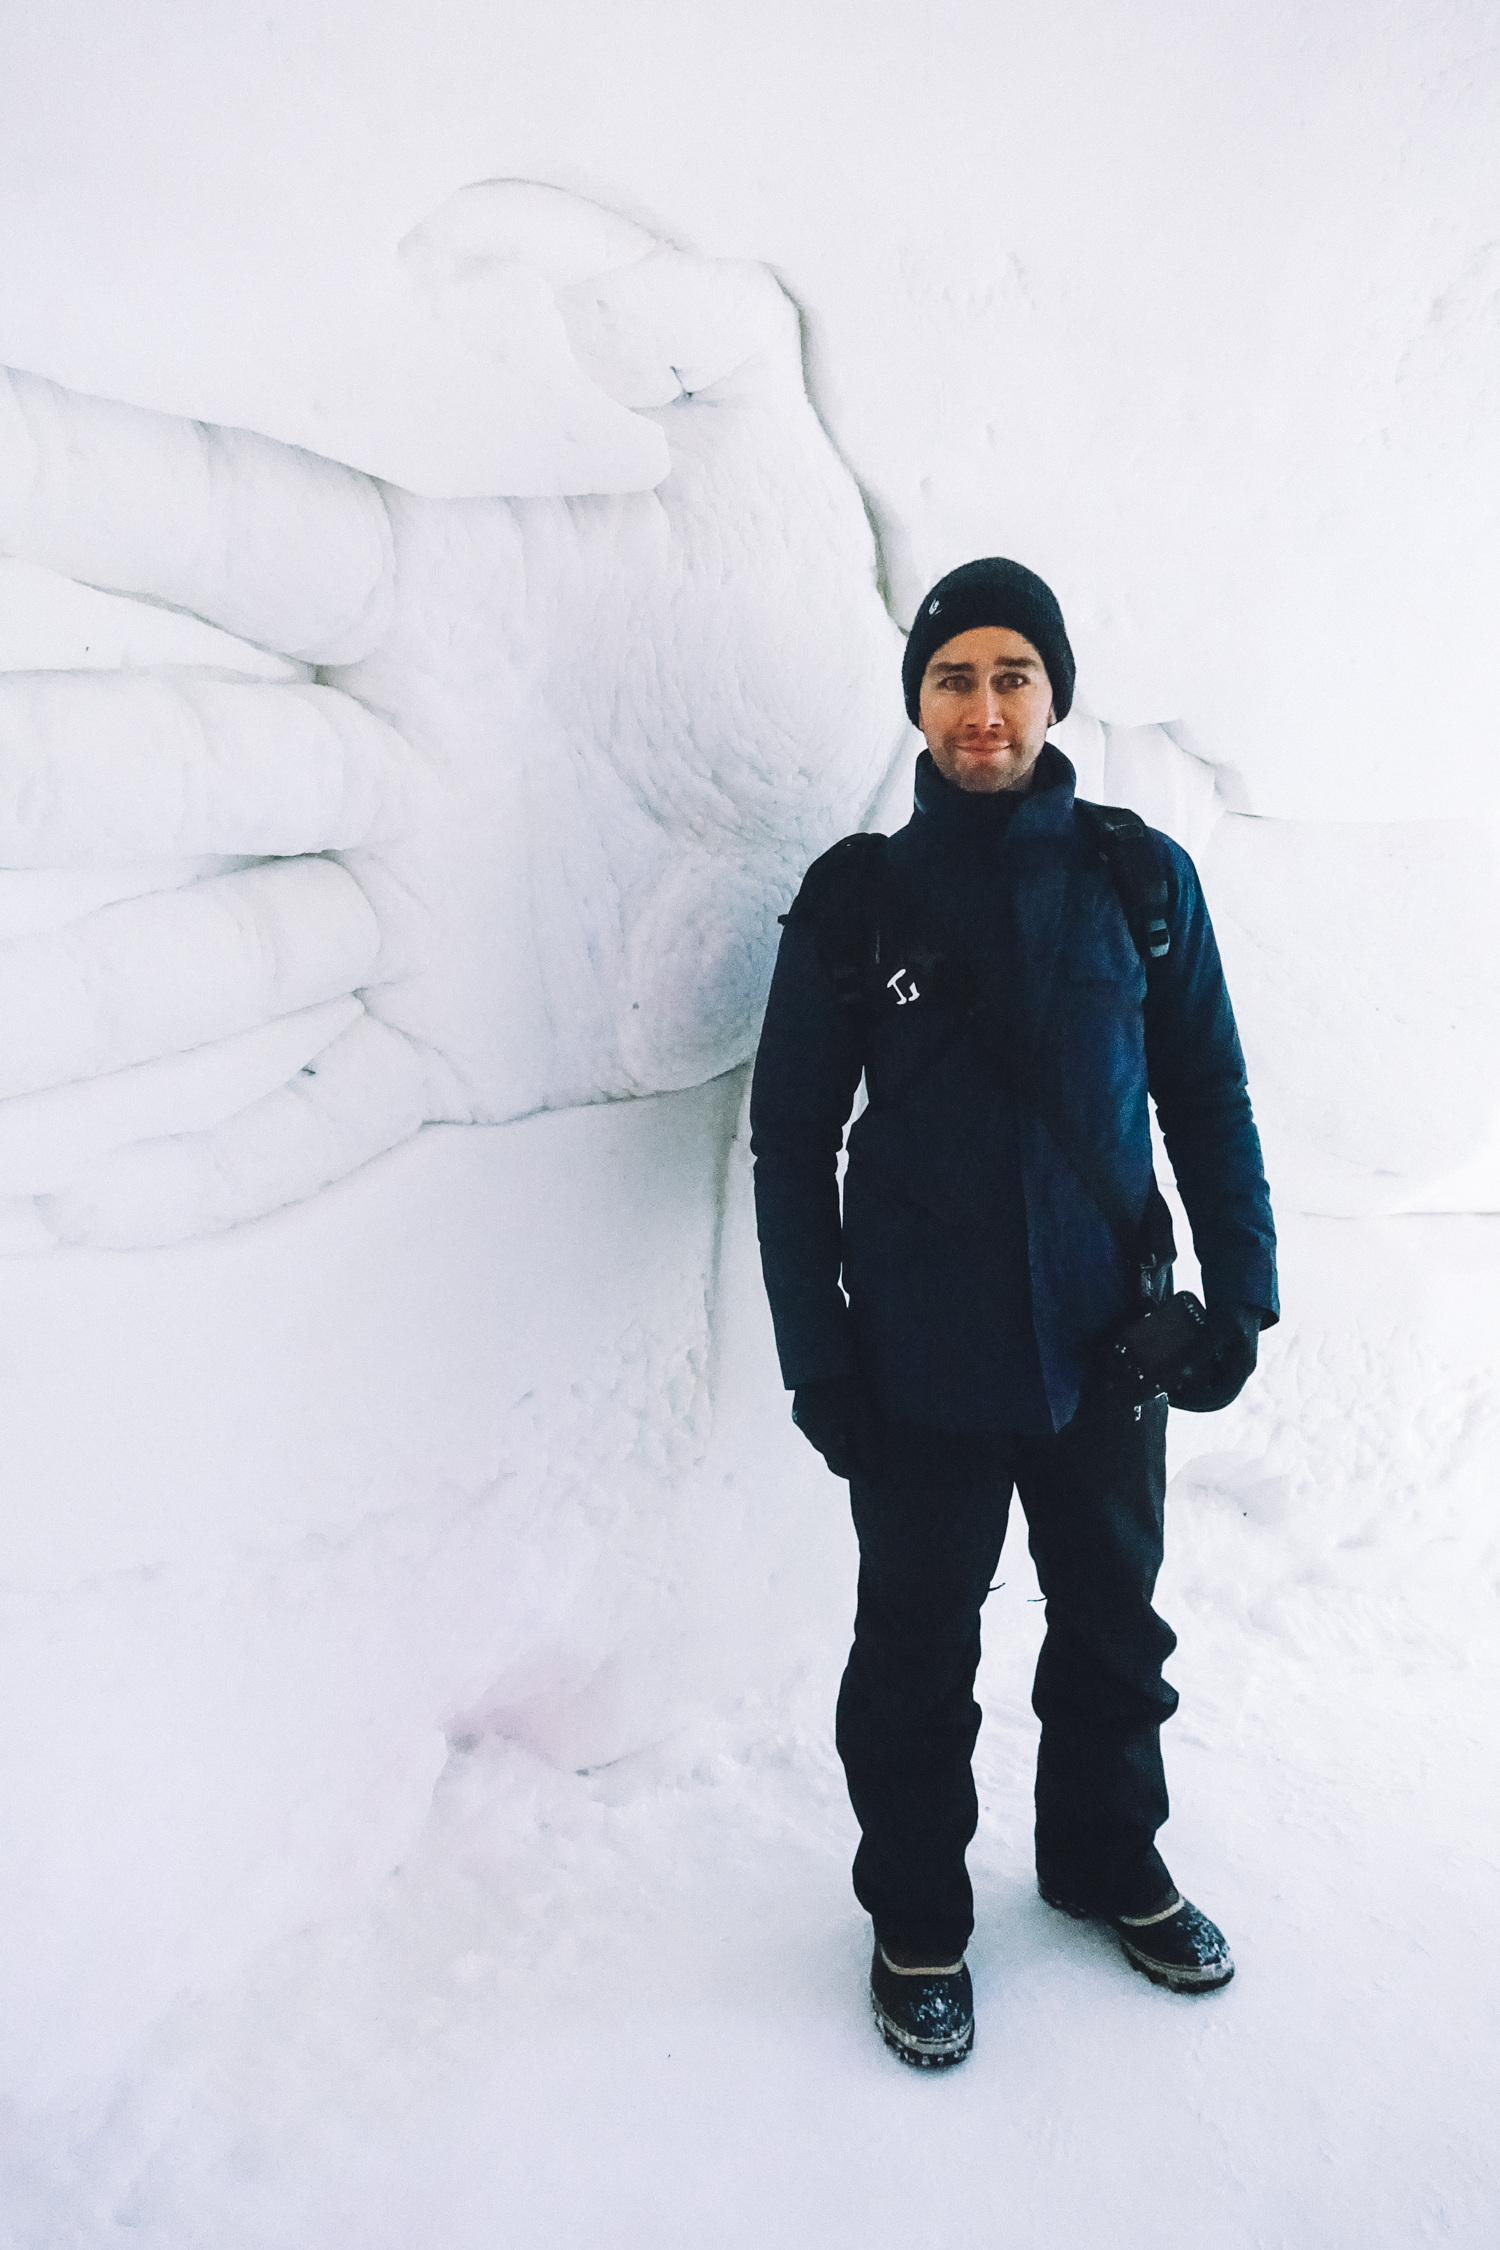 Torrance Coombs and Alyssa Campanella of The A List blog visits the Game of Thrones ice hotel in Finland